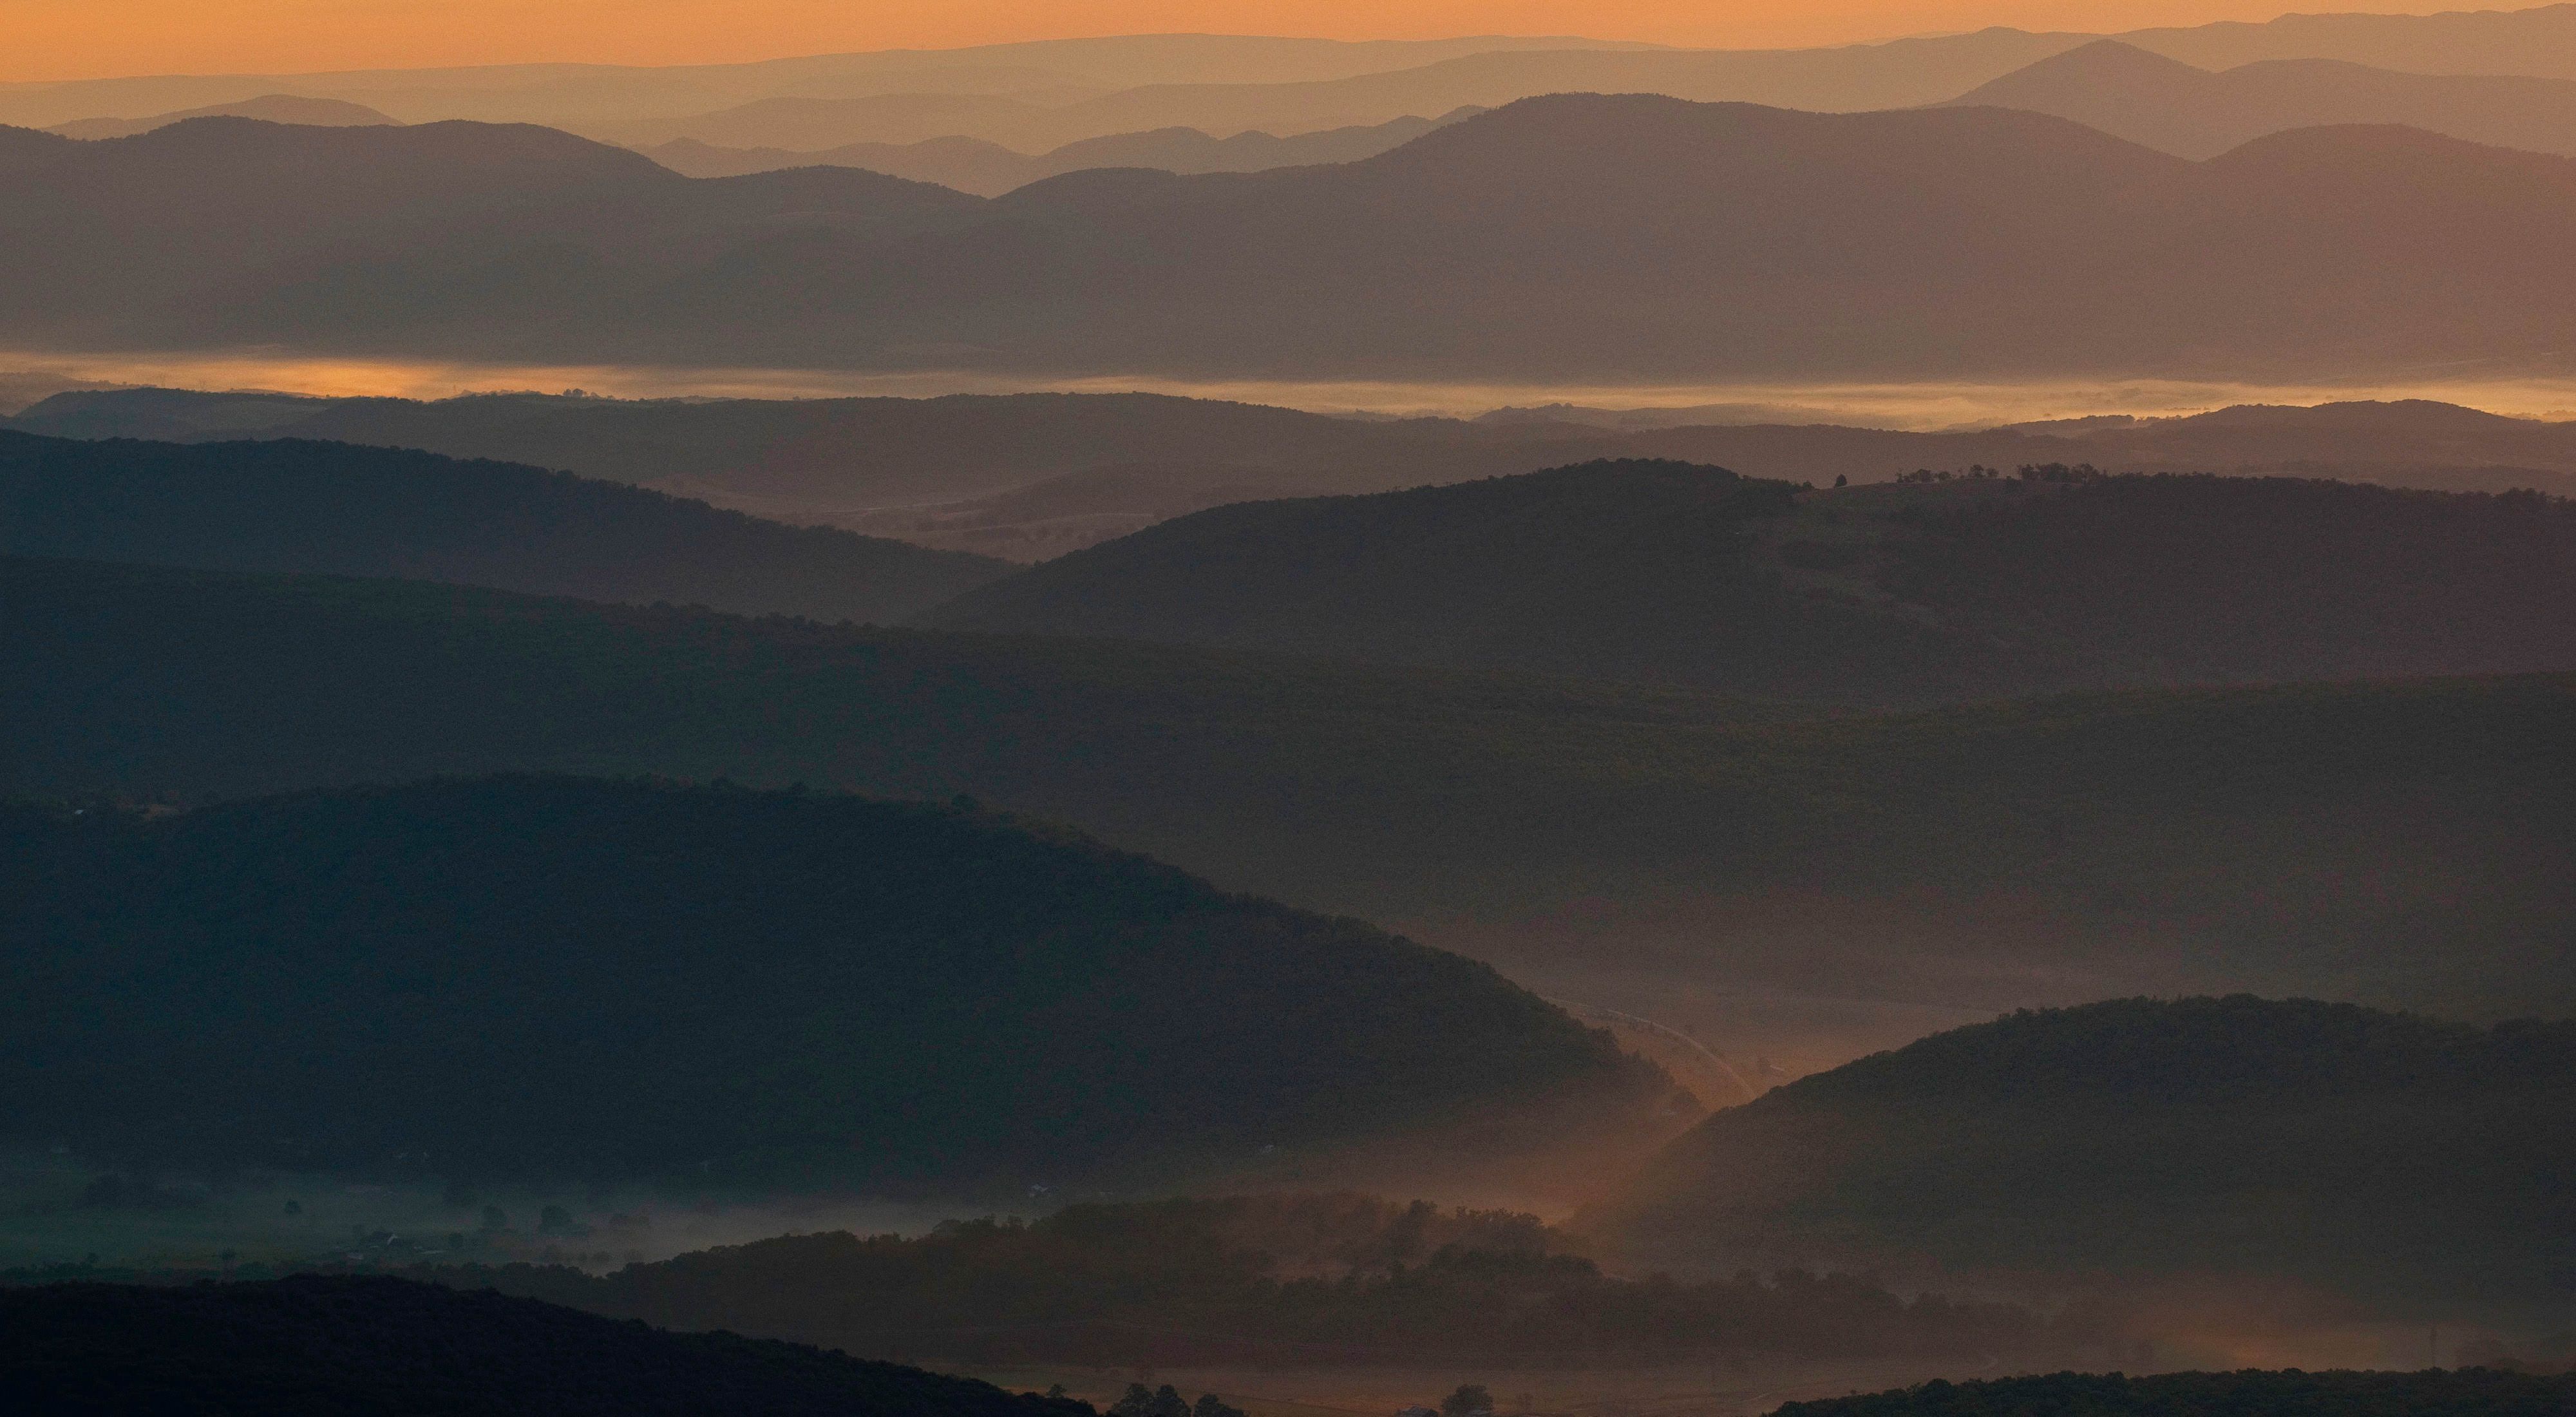 The rolling landscape of the Central Appalachians. The mountain ridges are silhouetted by the setting sun.